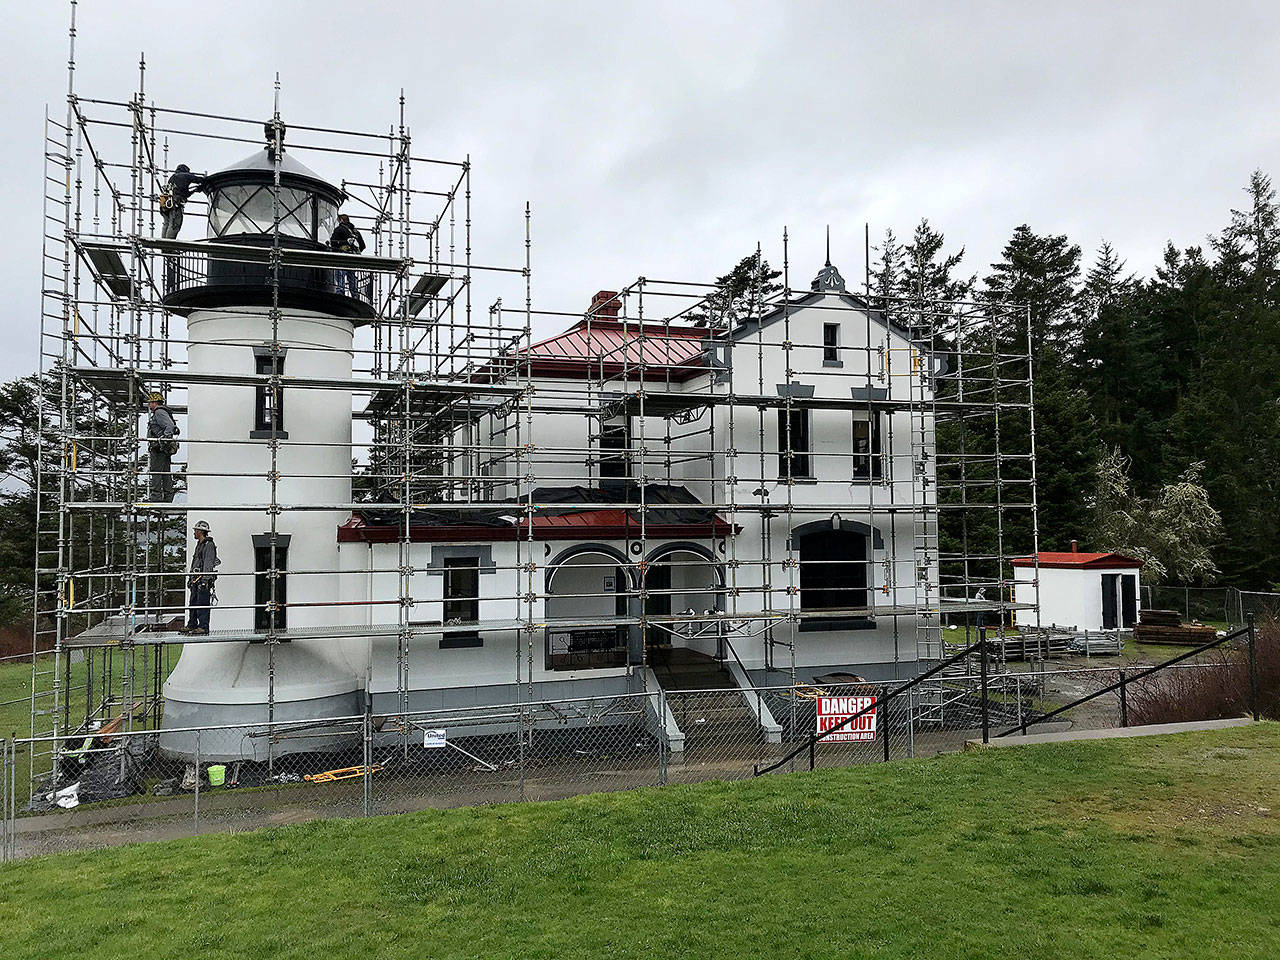 Photo provided                                The Admiralty Head Lighthouse at Fort Casey State Park is closed to visitors for restoration work.